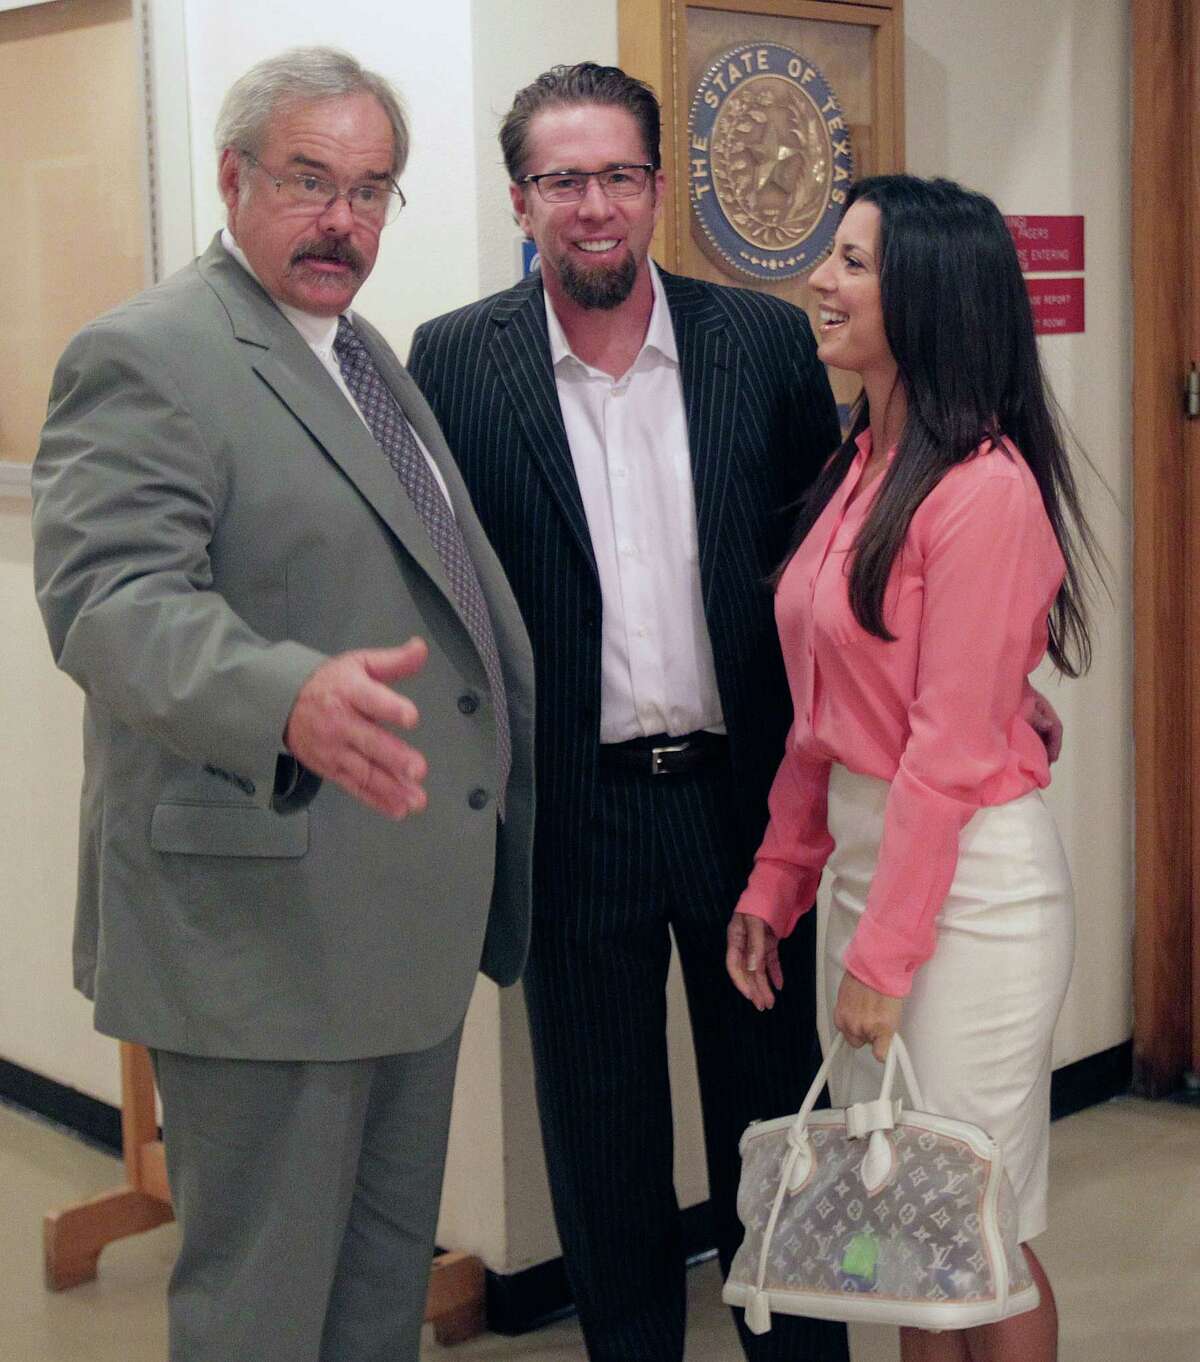 Rachael Brown, Jeff Bagwell, center, and Brown's attorney David Brown exit the courtroom before a hearing on a contempt-of-court order for former hand surgeon and Rachael Brown's ex-husband Michael Brown in the 309th Family Court, July 30, 2013, in Houston. ( James Nielsen / Houston Chronicle )